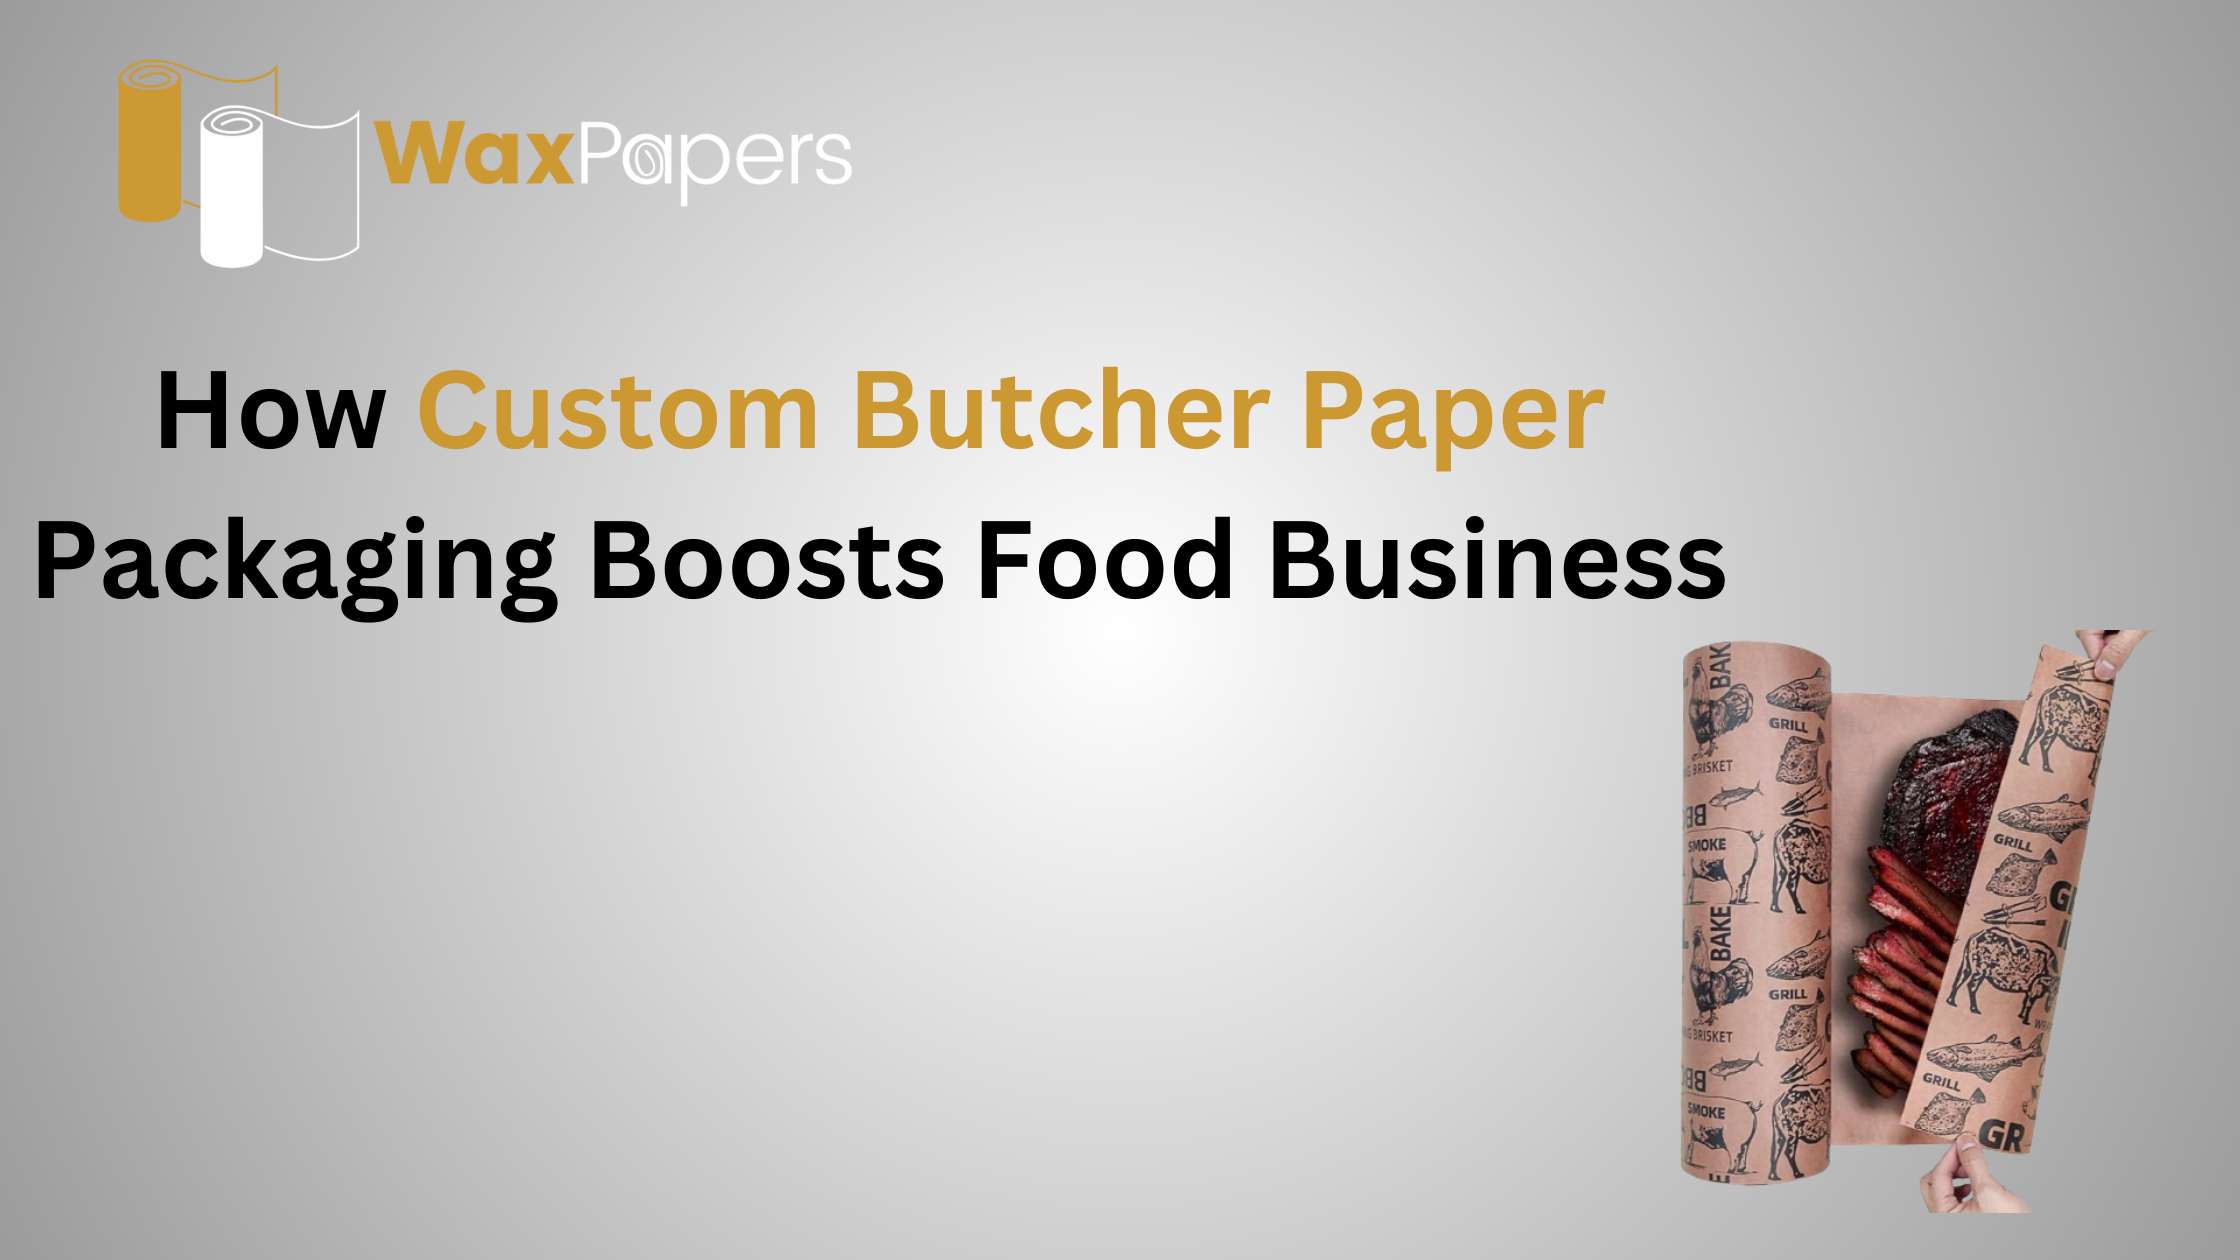 How Custom Butcher Paper Packaging Boosts Food Business